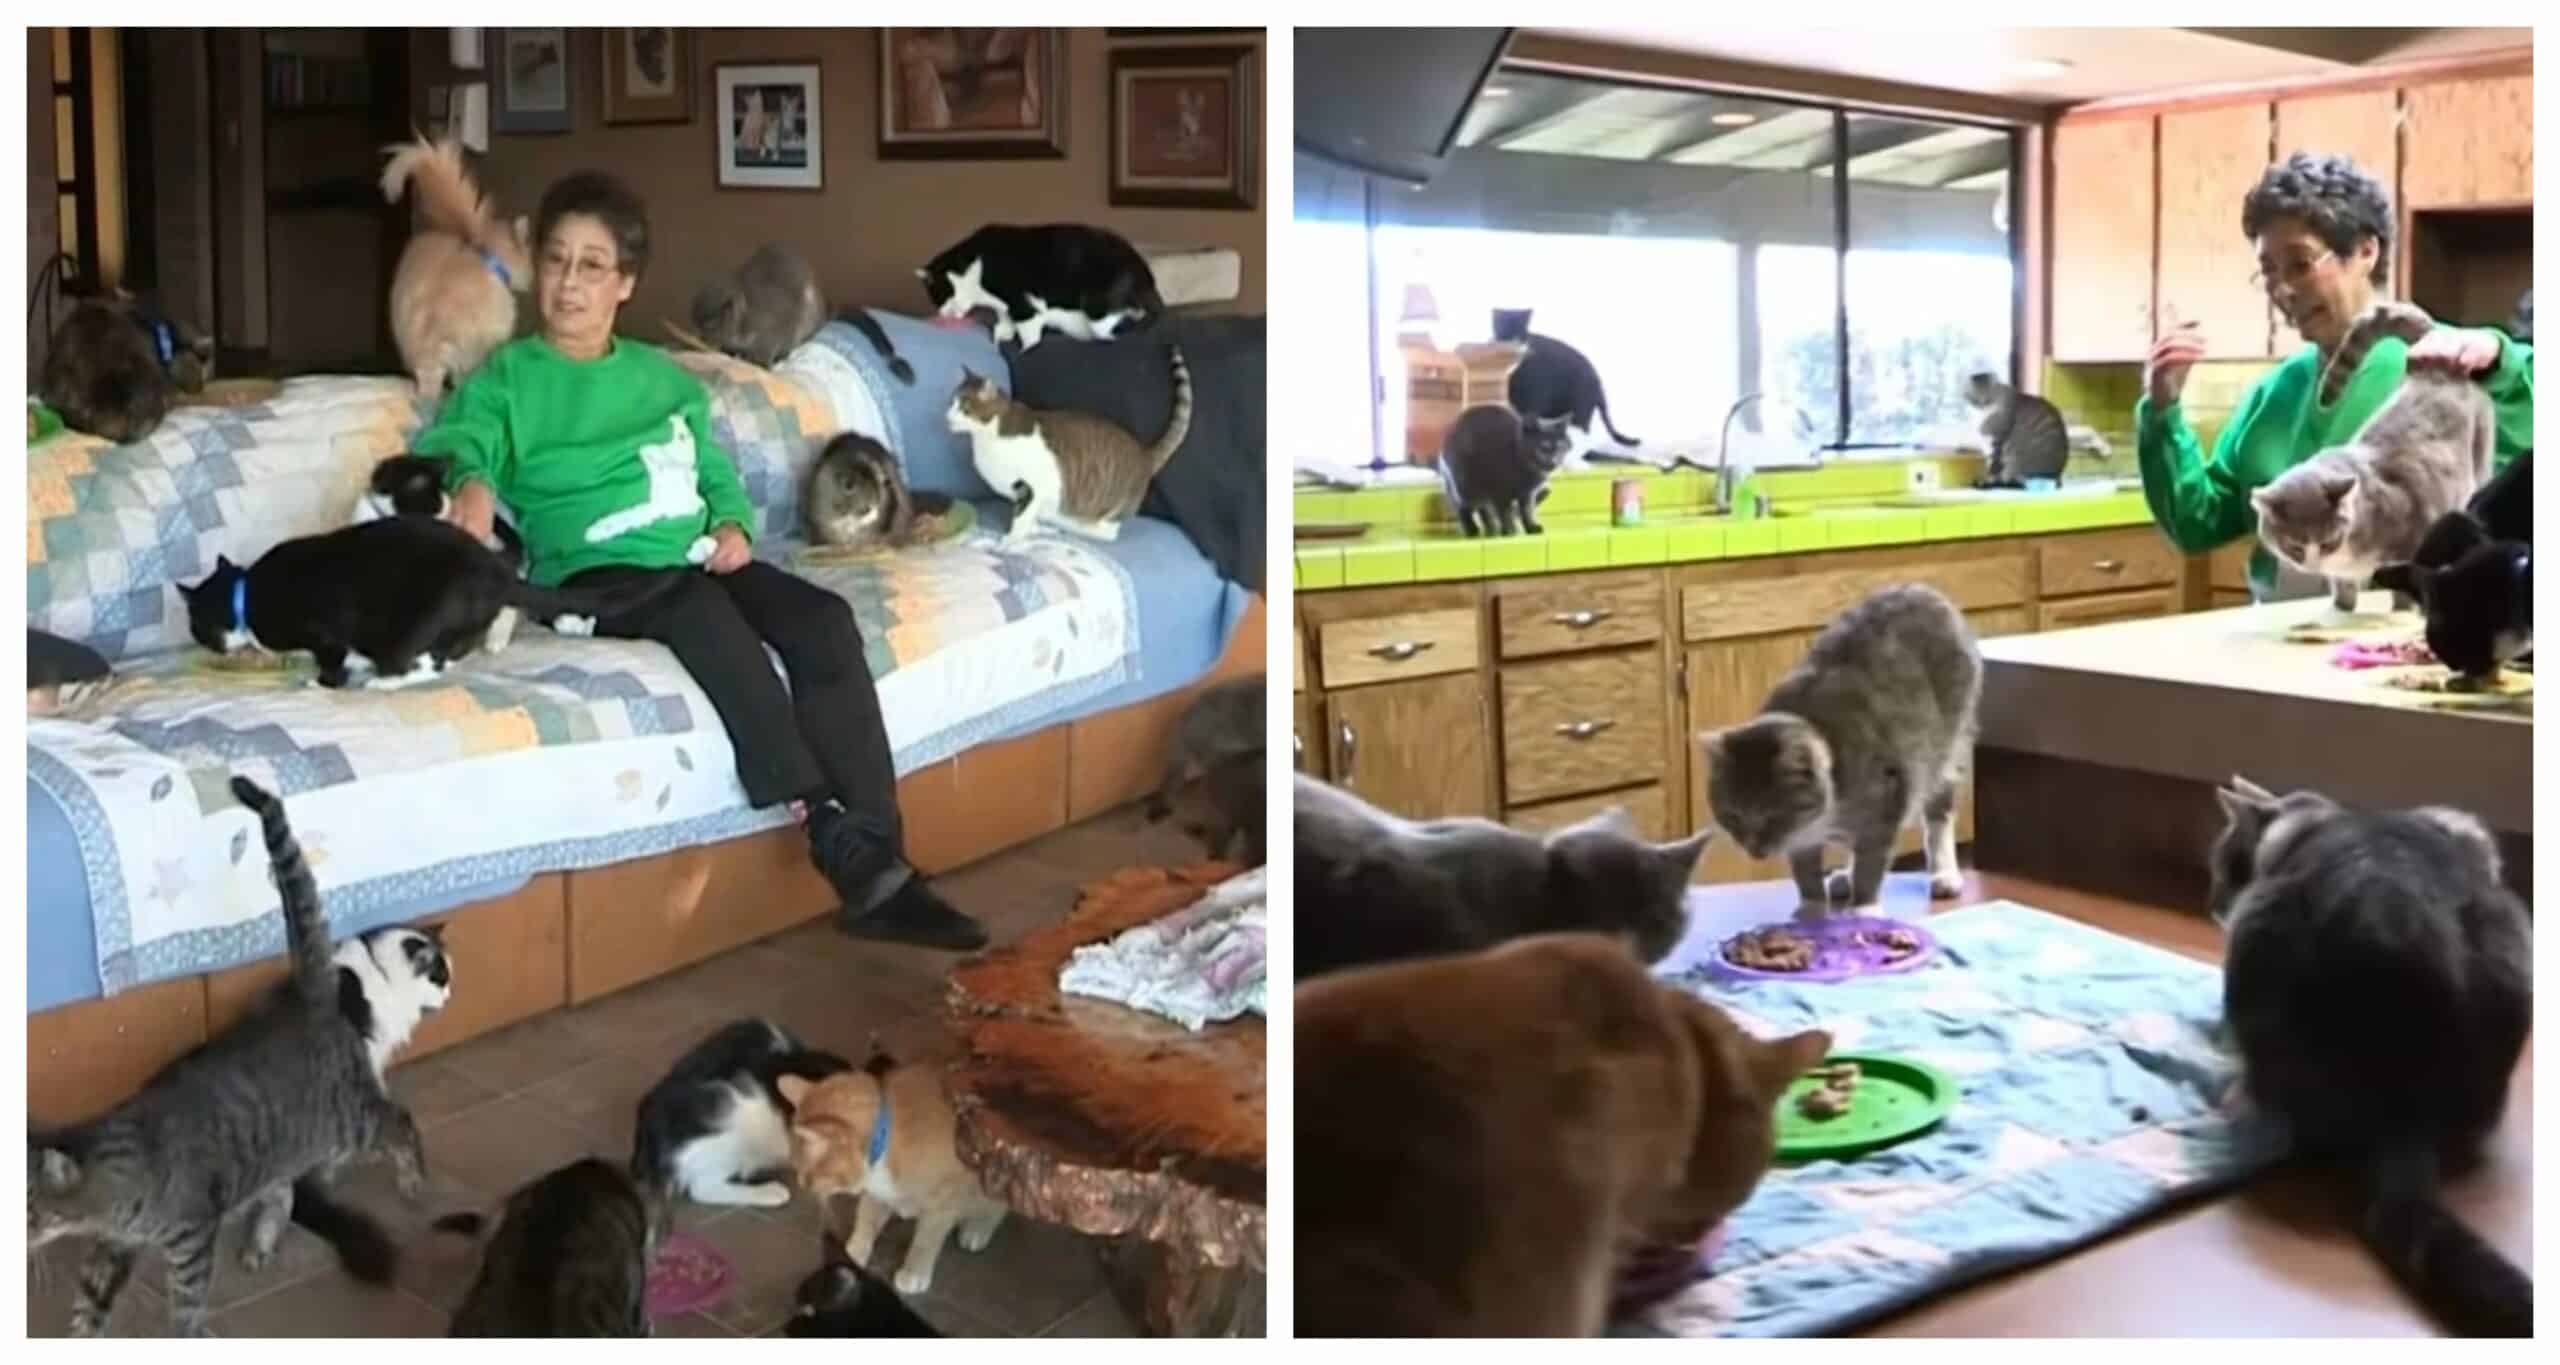 View the sight of the home where a woman keeps more than 1,000 cats